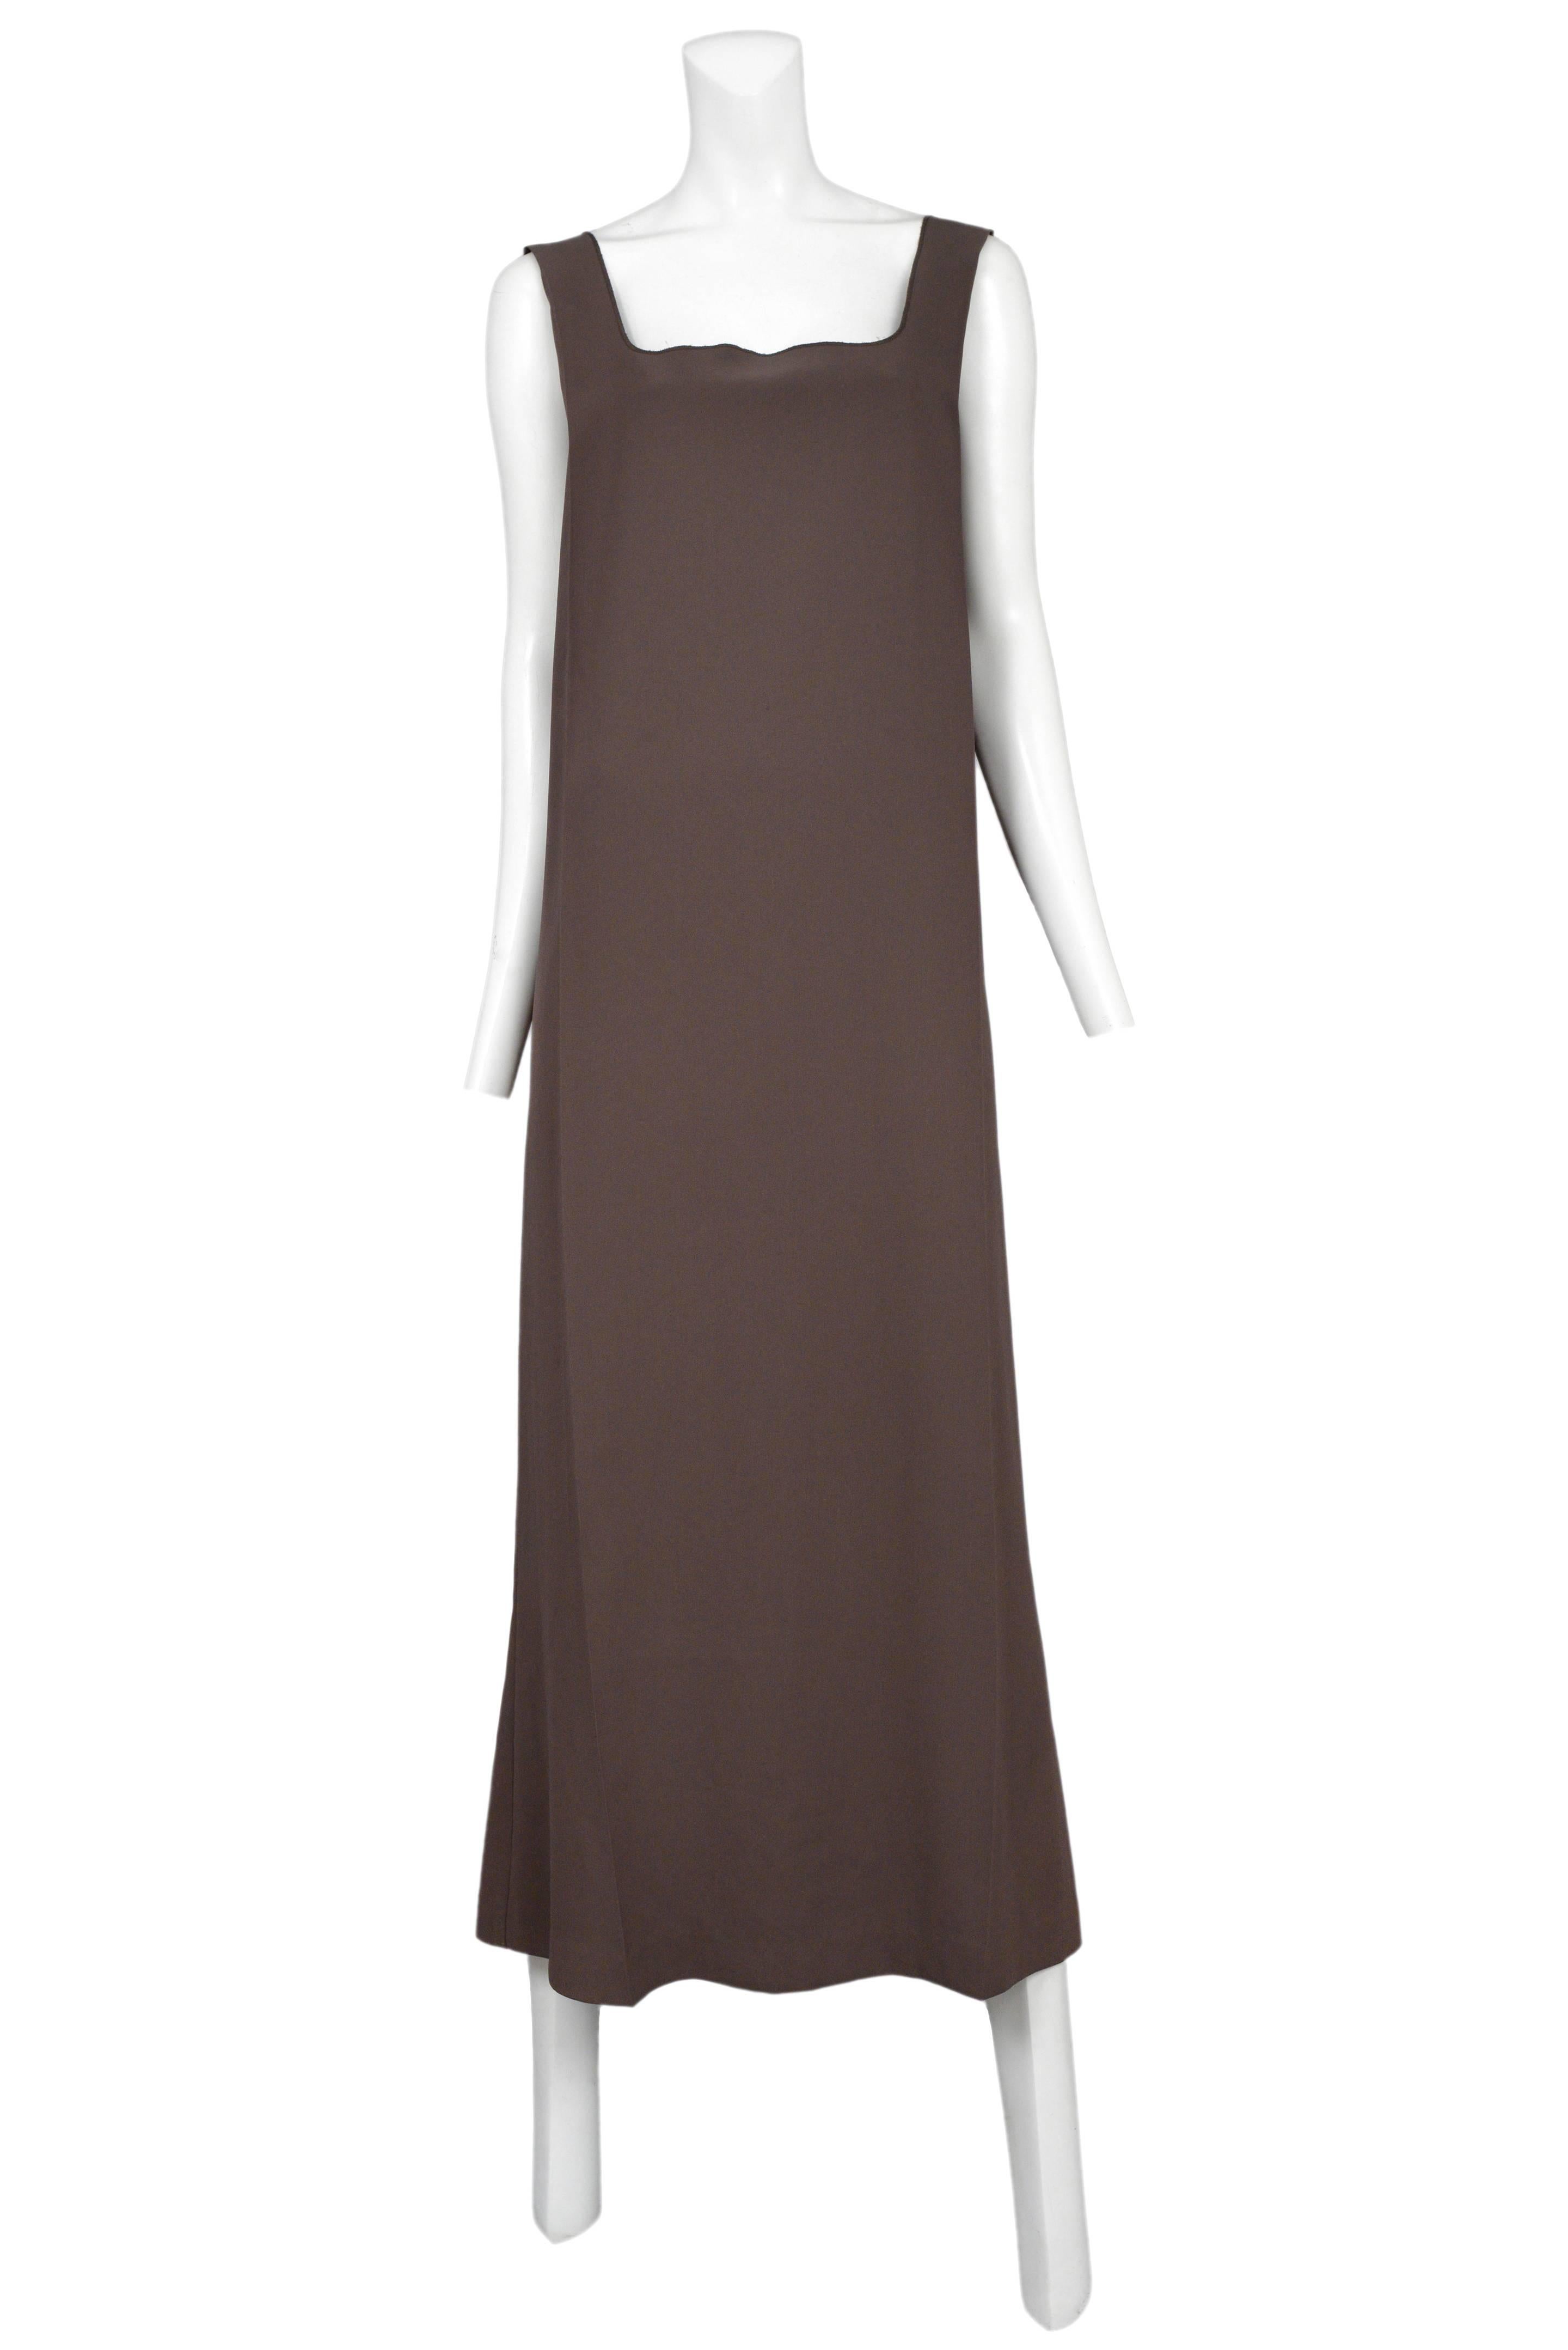 Vintage Maison Martin Margiela brown sleeveless maxi dress featuring a square neckline.
Please inquire for additional images.